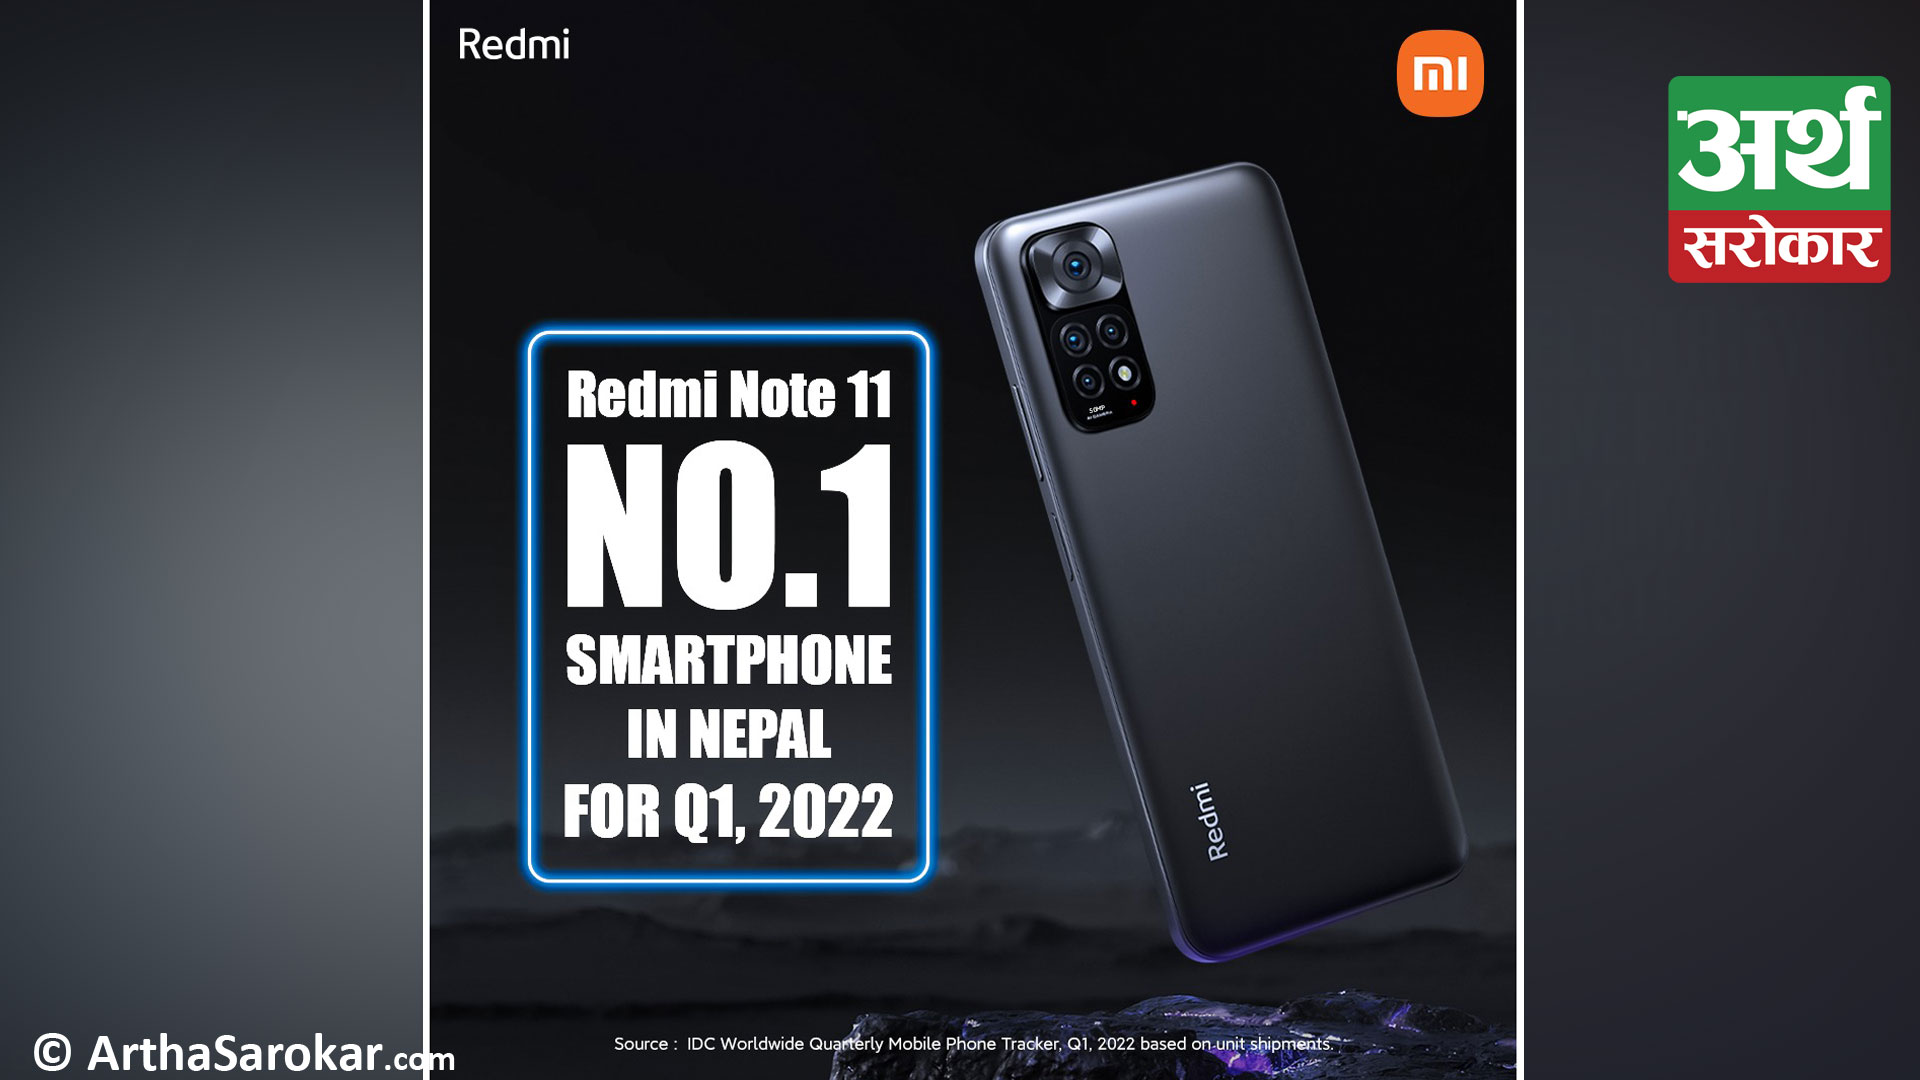 Redmi Note 11 becomes the top Smartphone